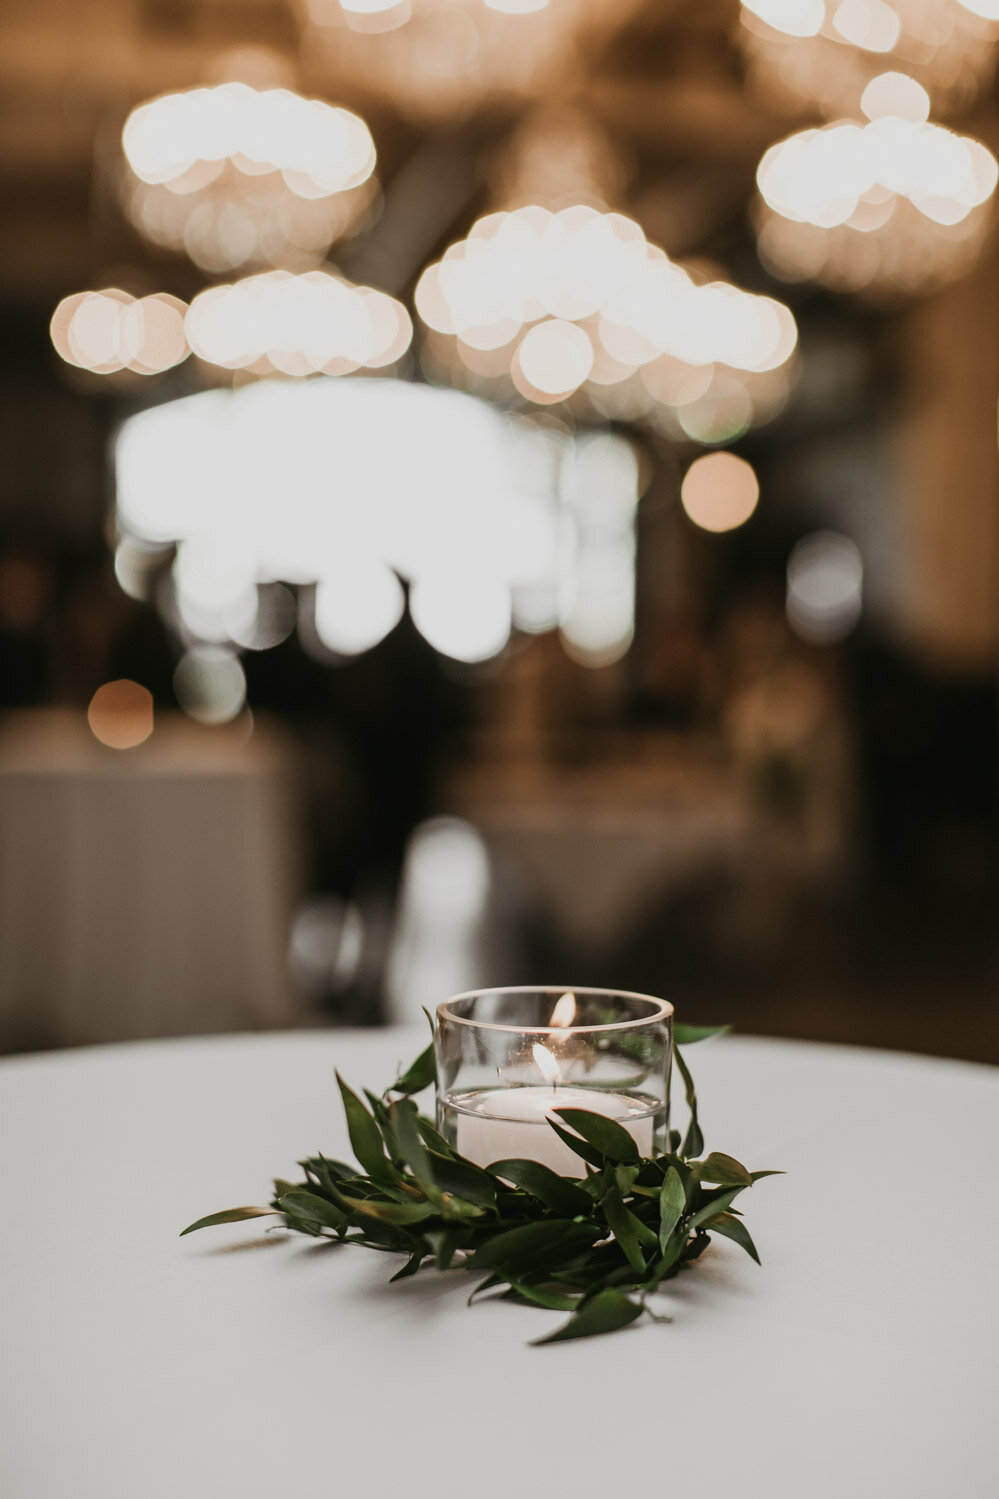 20 Wedding Day Decor Cocktail Tables Candles Greenery.jpg